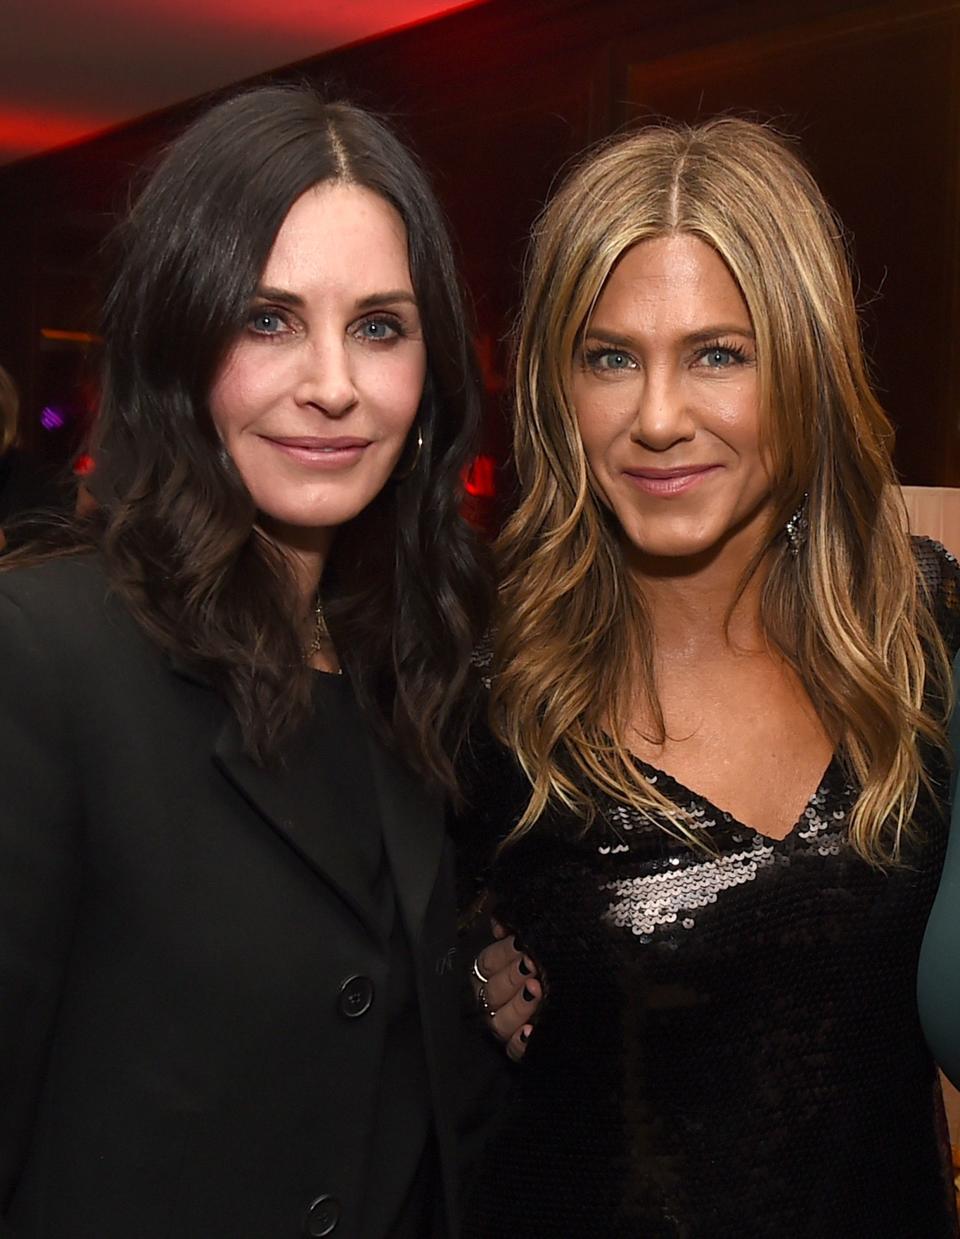 Courteney Cox (L) and Jennifer Aniston pose at the after party for the premiere of Netflix's "Dumplin'" in December.